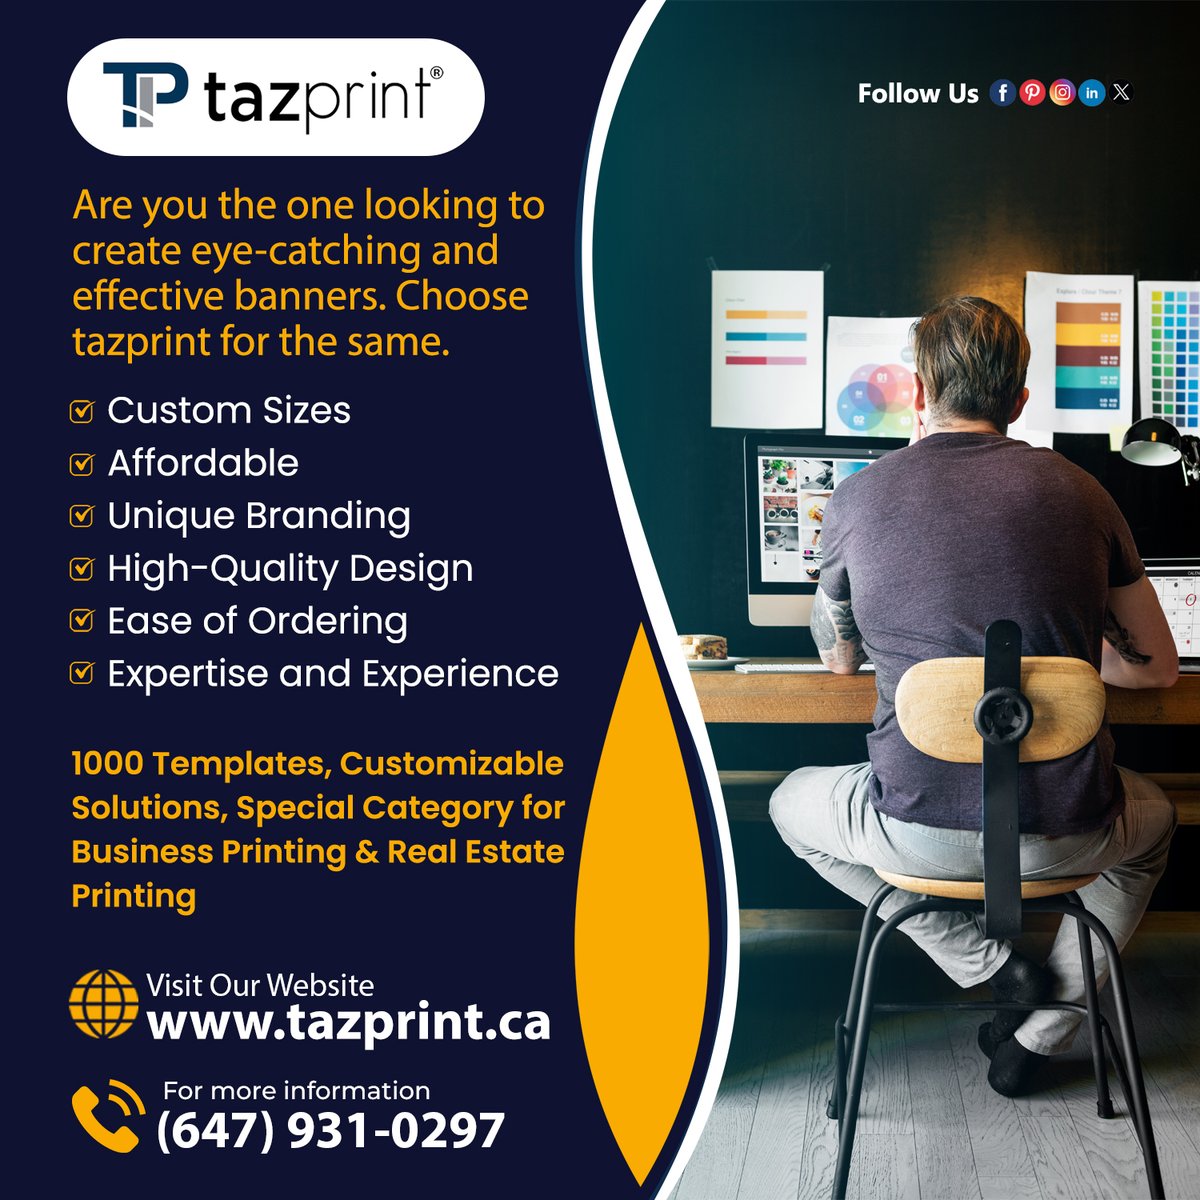 Are you the one looking to create eye-catching and effective banners. Choose tazprint for the same.
✅Custom Sizes
✅Affordable
✅Unique Branding
✅High-Quality Design

☎️Contact us Today:+1 647-931-0297

#eyecatchingbanners #affordable #onlineprintingservices #canada #tazprint